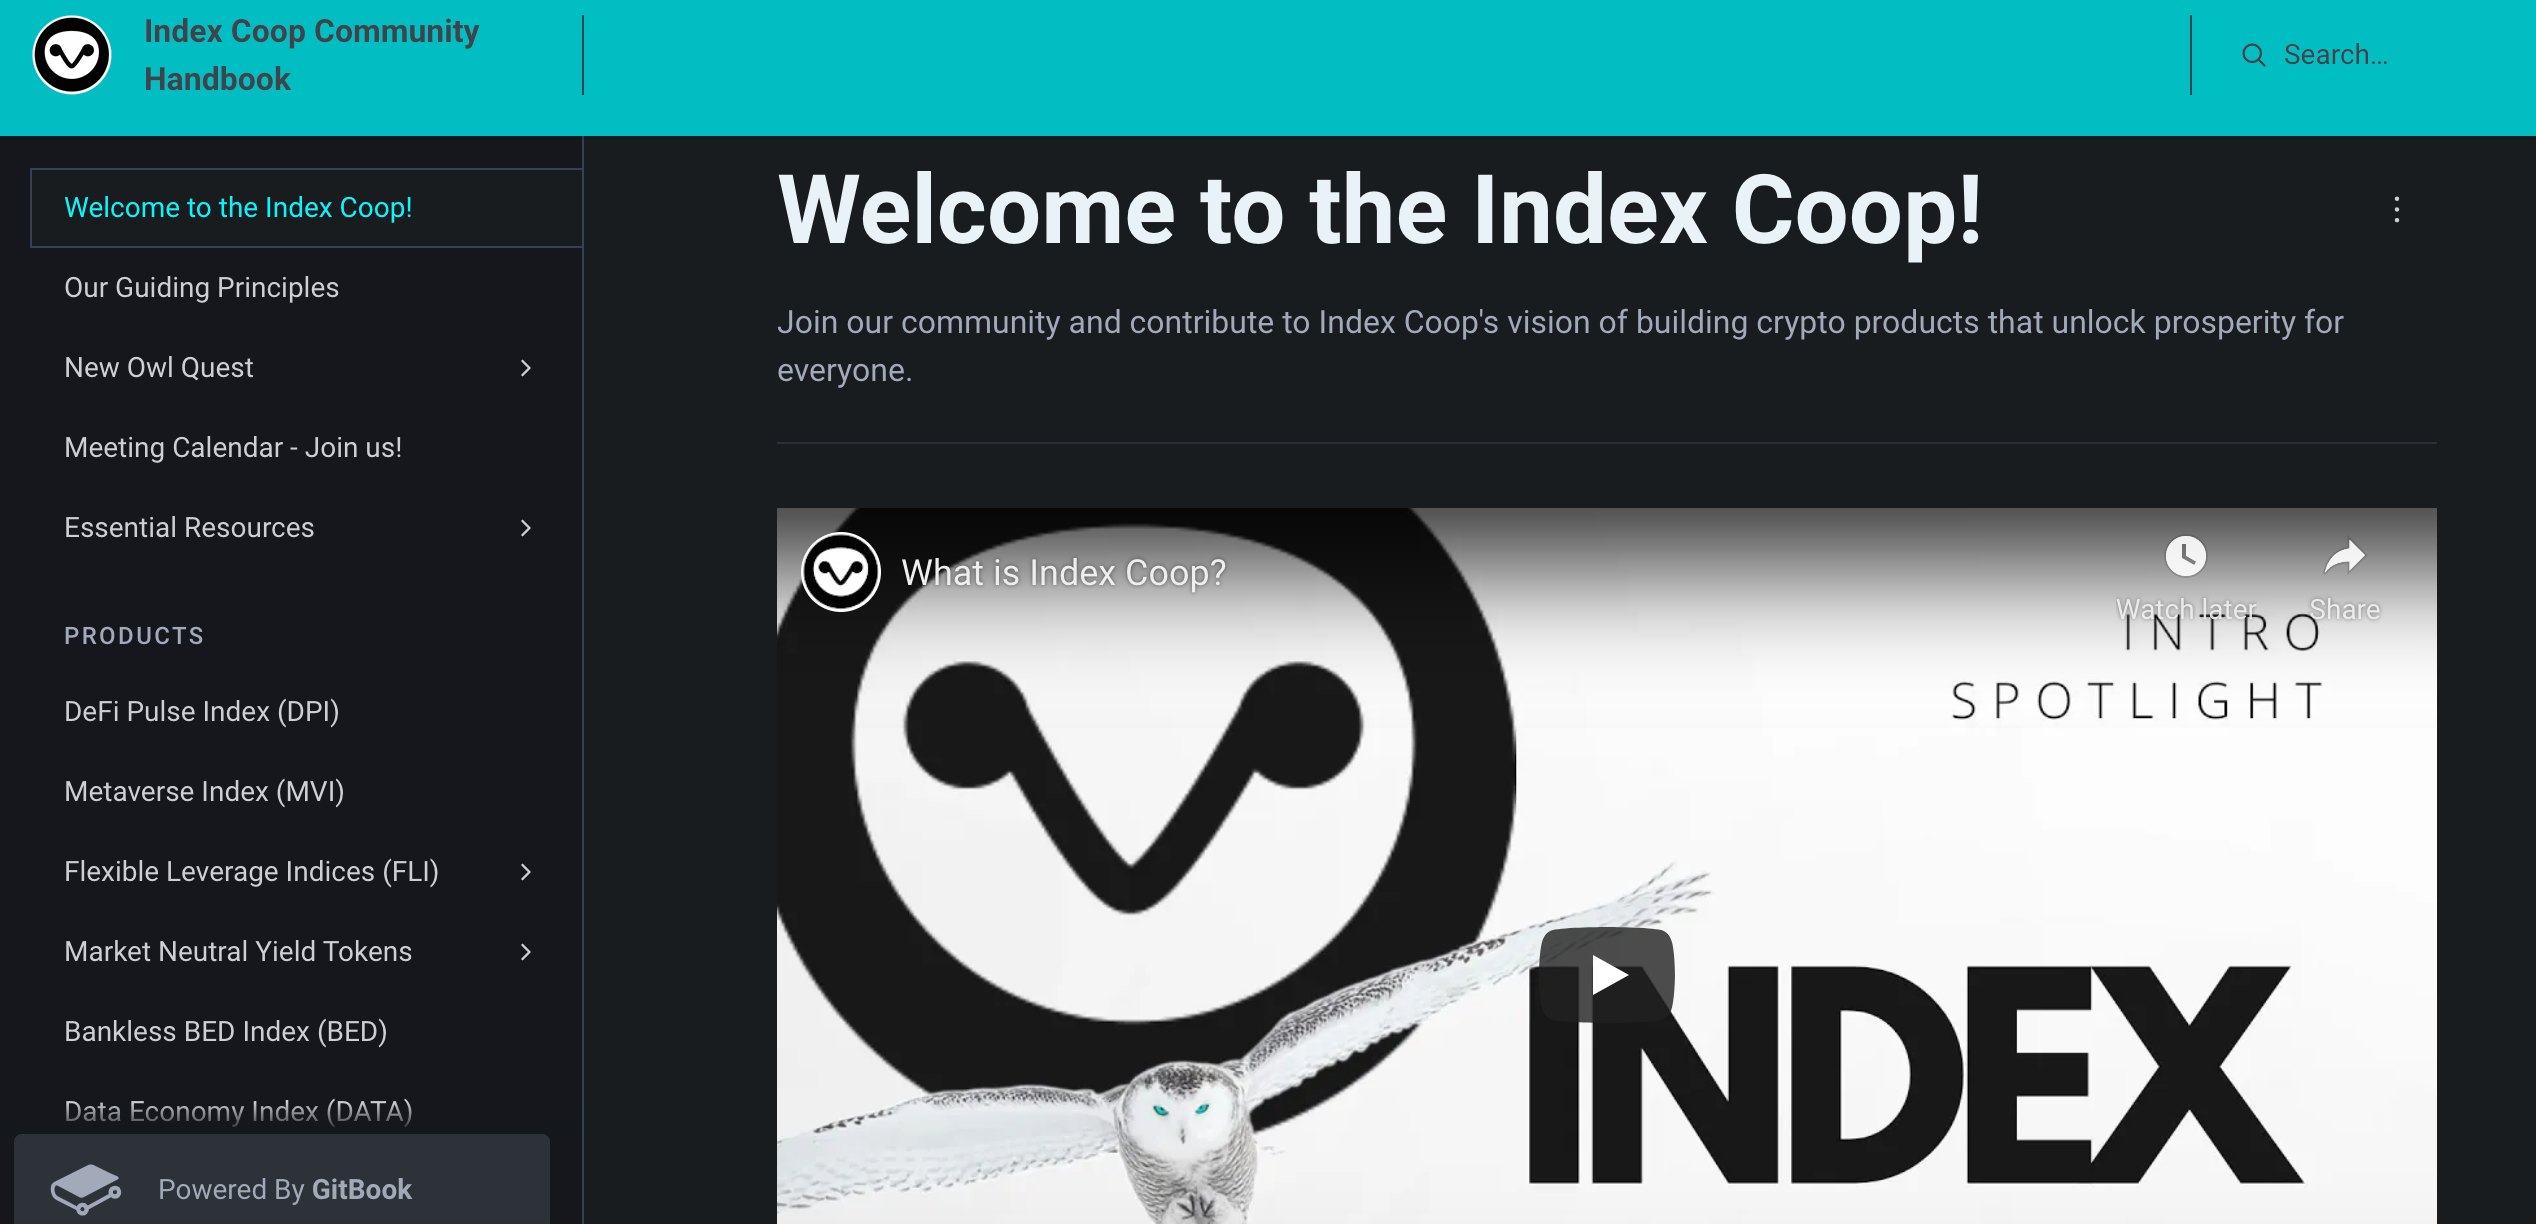 Index Coop’s community handbook is a best-in-class example of public, transparent documentation for both existing and prospective community members